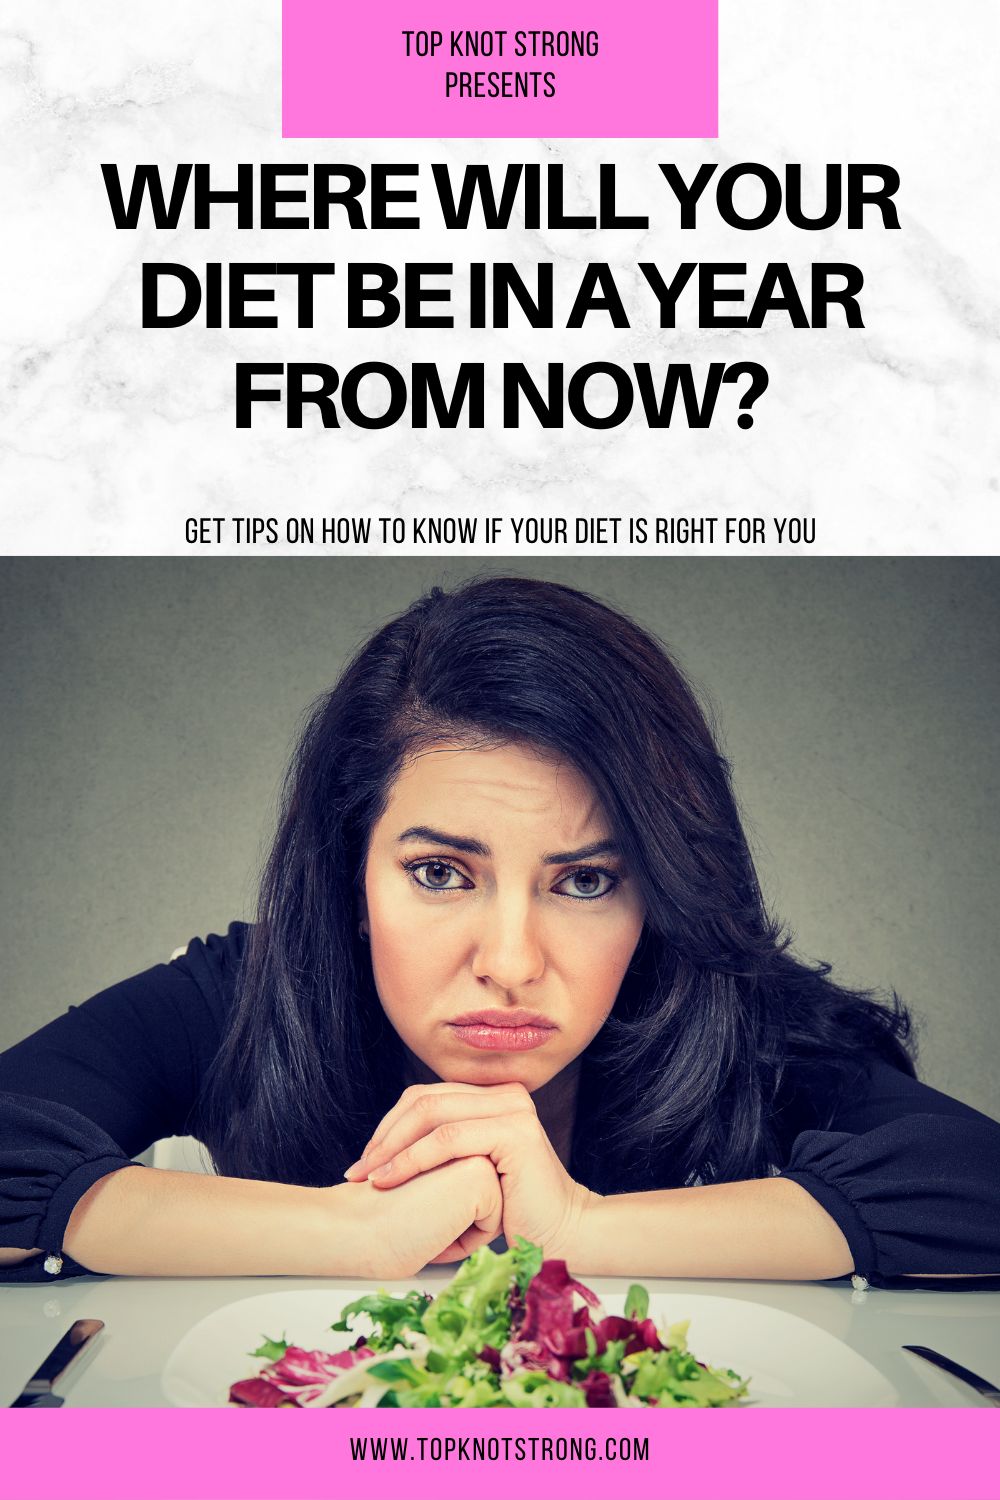 Where will your diet be in a year from now?